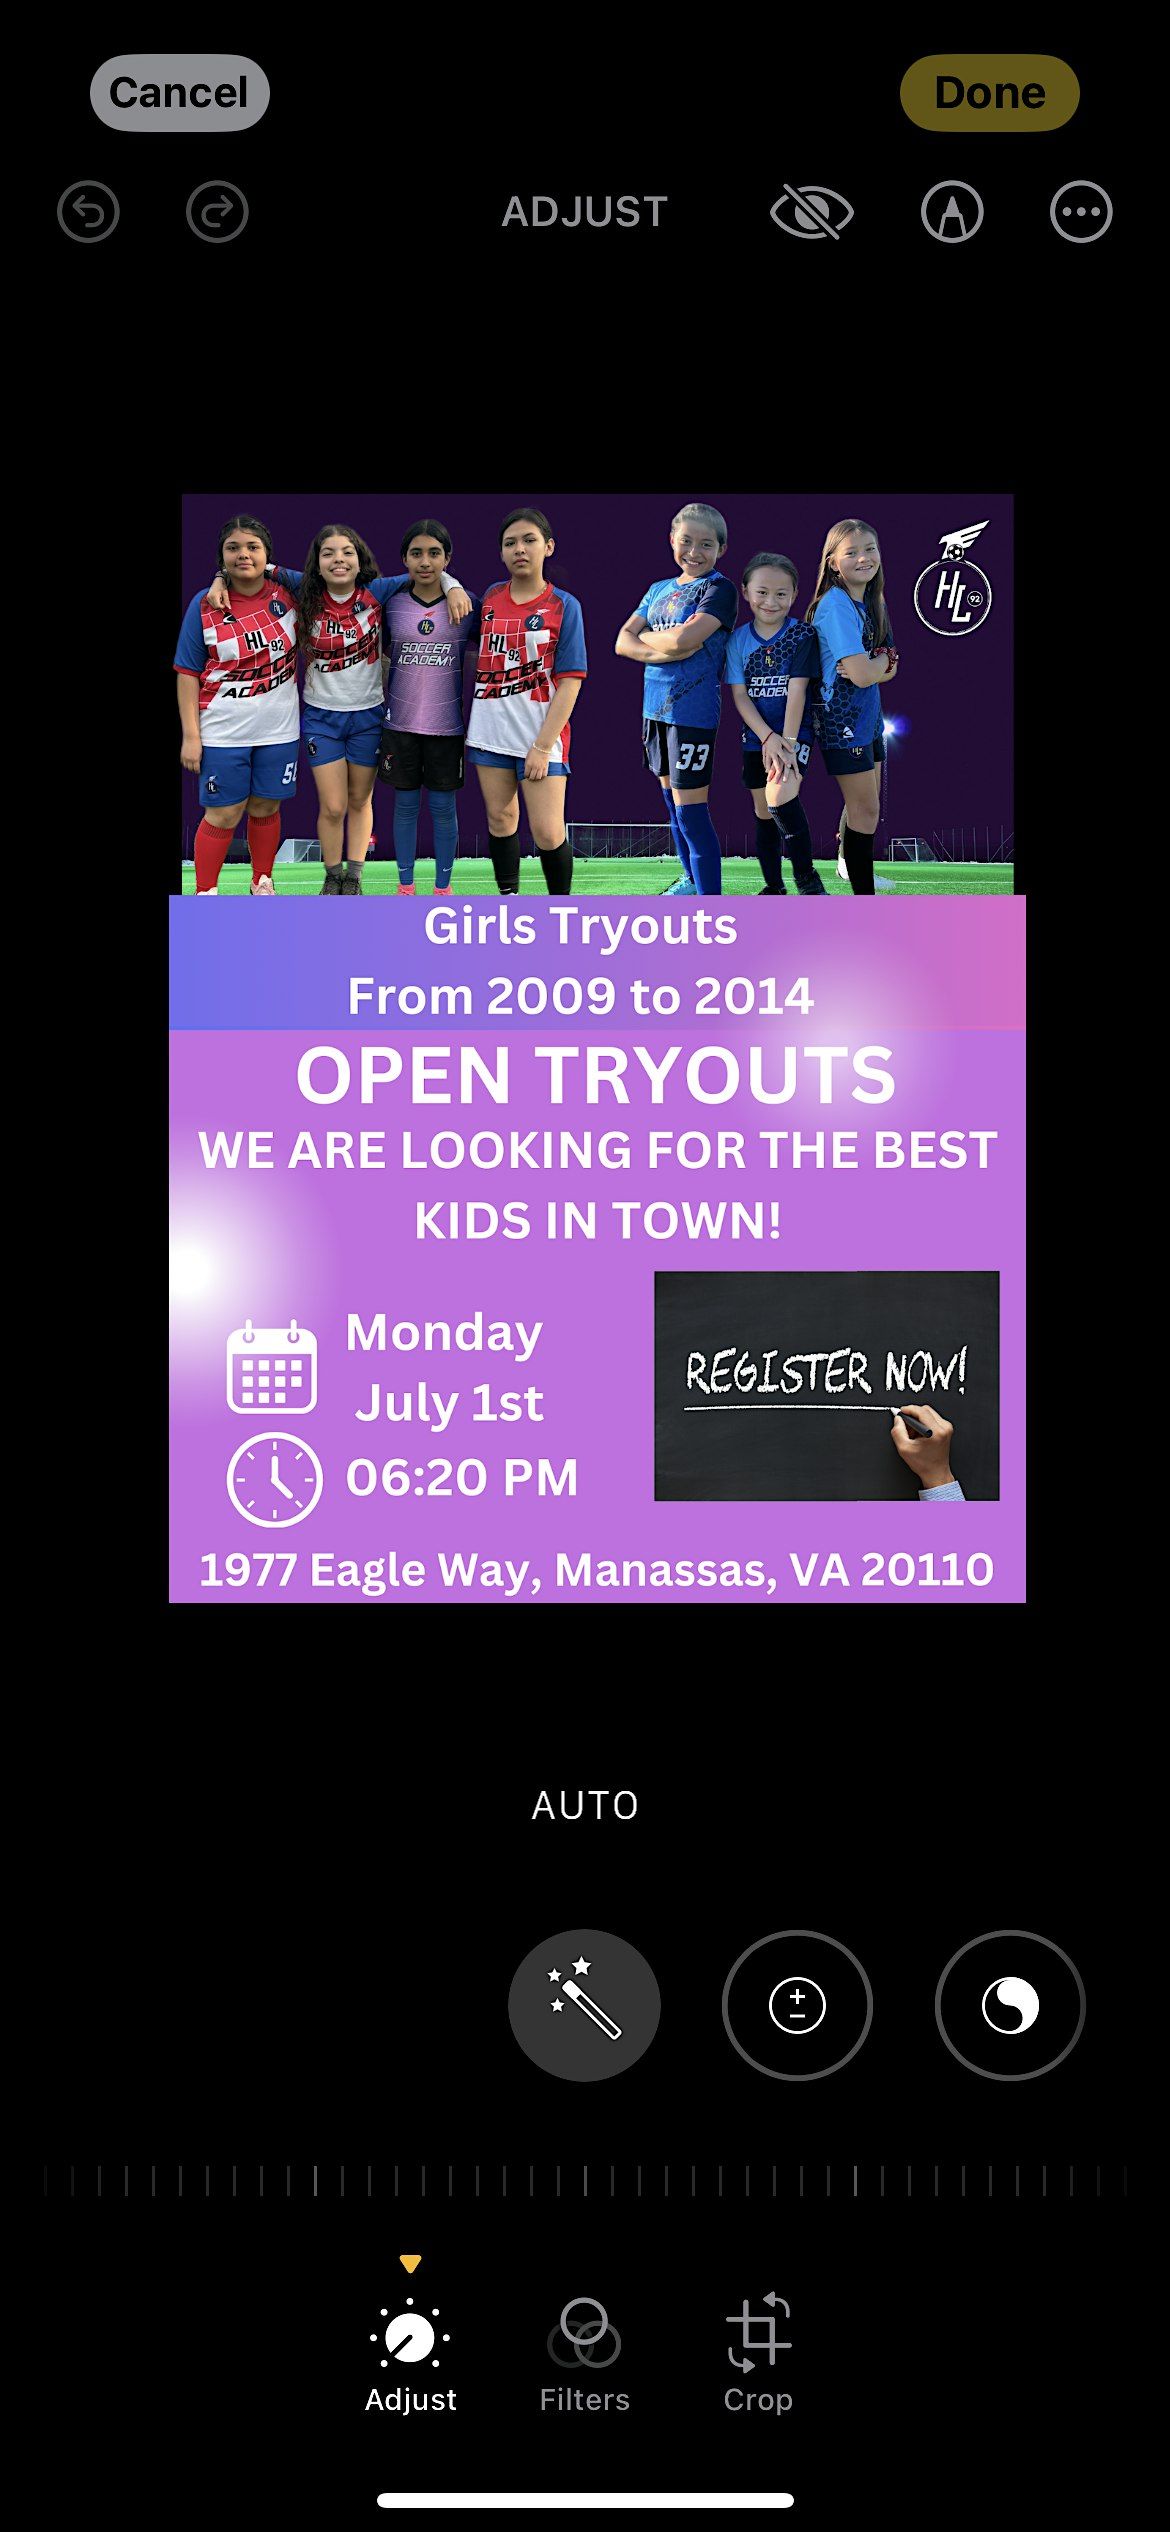 HL92 Girls Tryouts born between 2009 to 2014